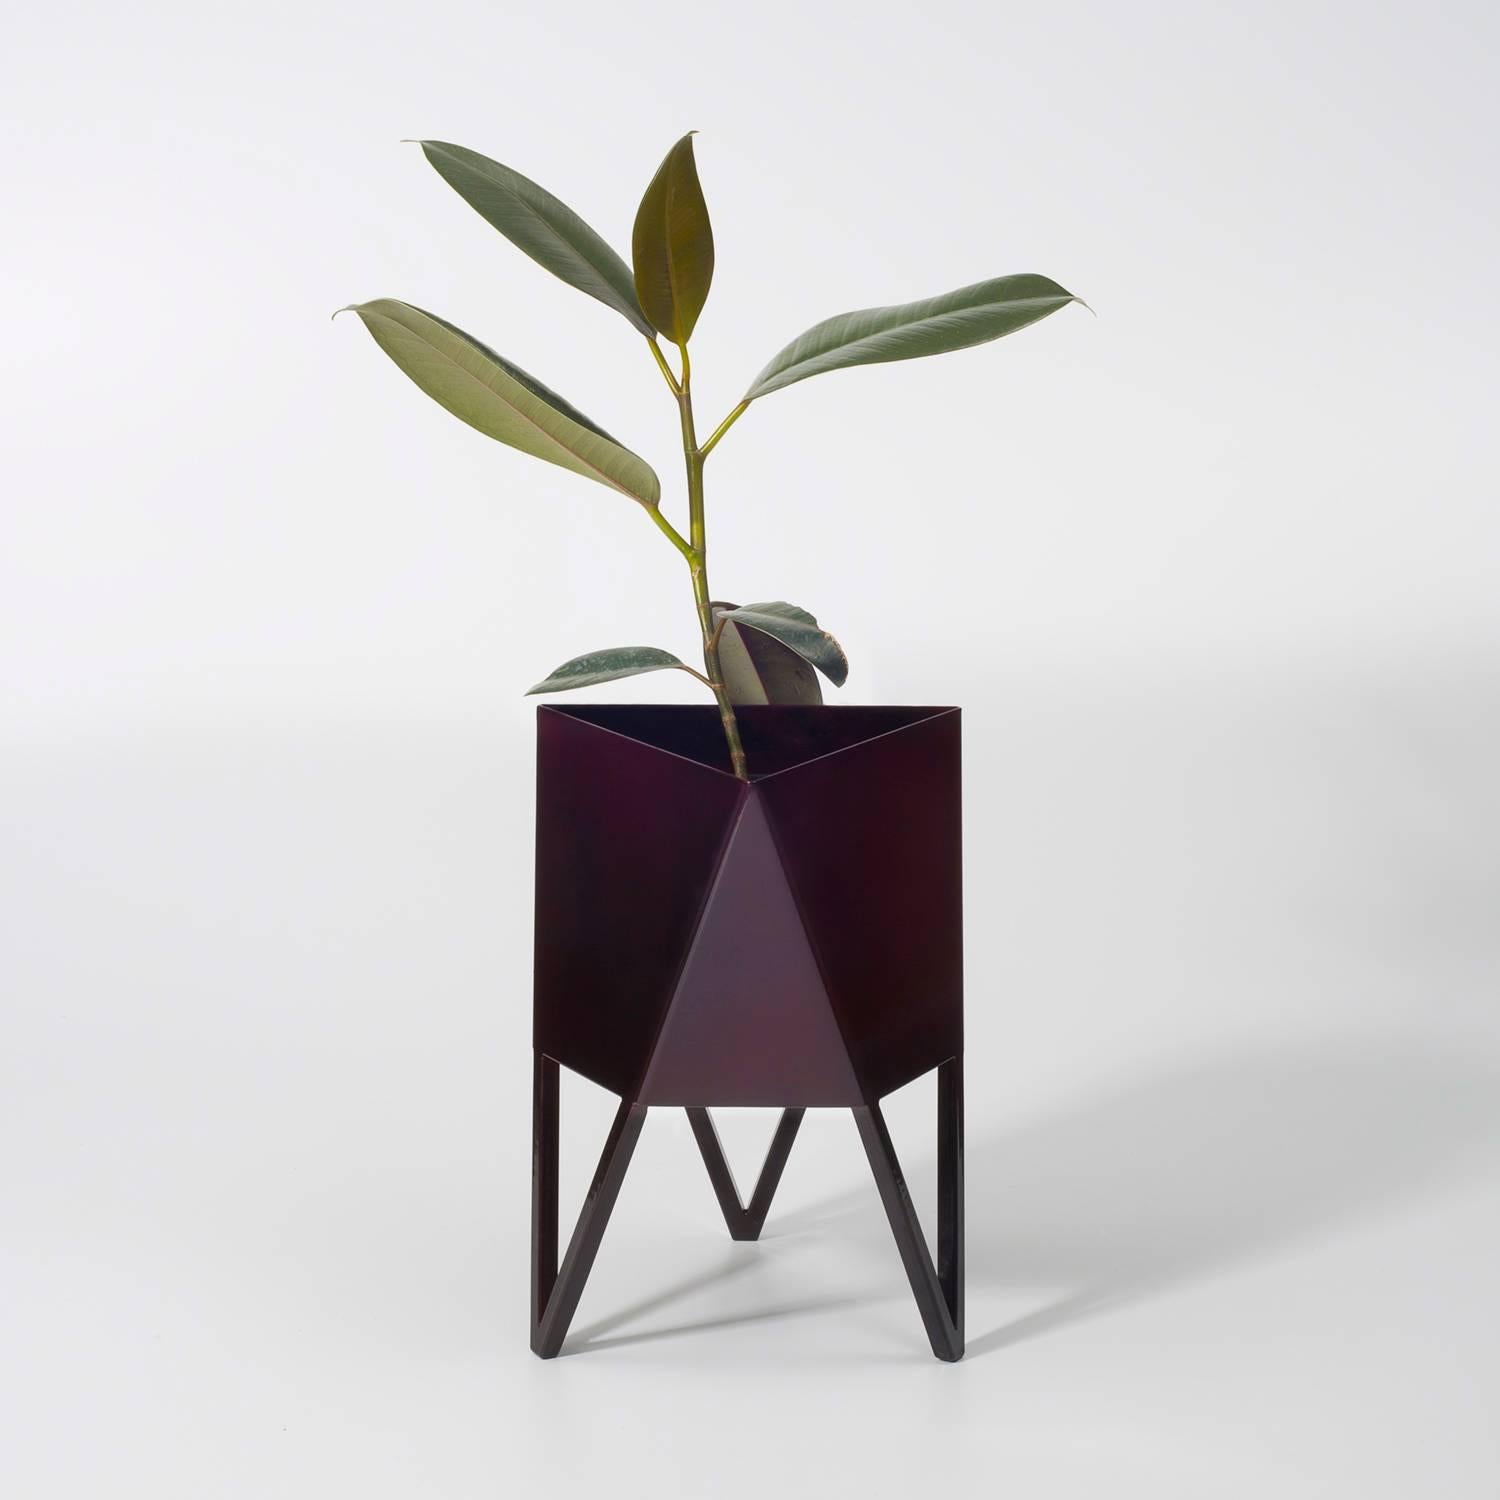 Deca Planter in Light Pink Steel, Small, by Force/Collide 1